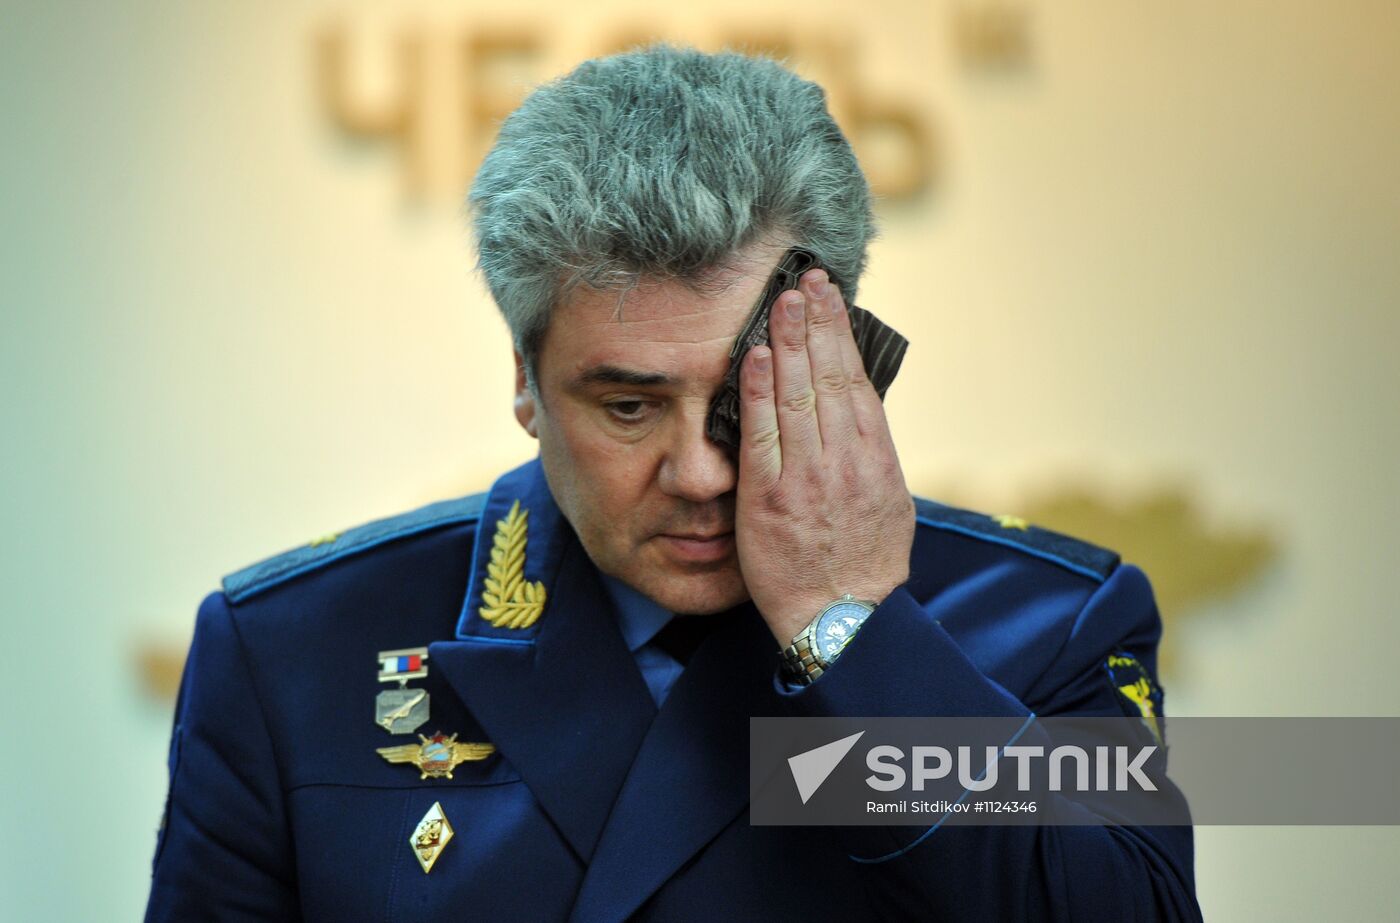 Russian Air Force Commander introduced